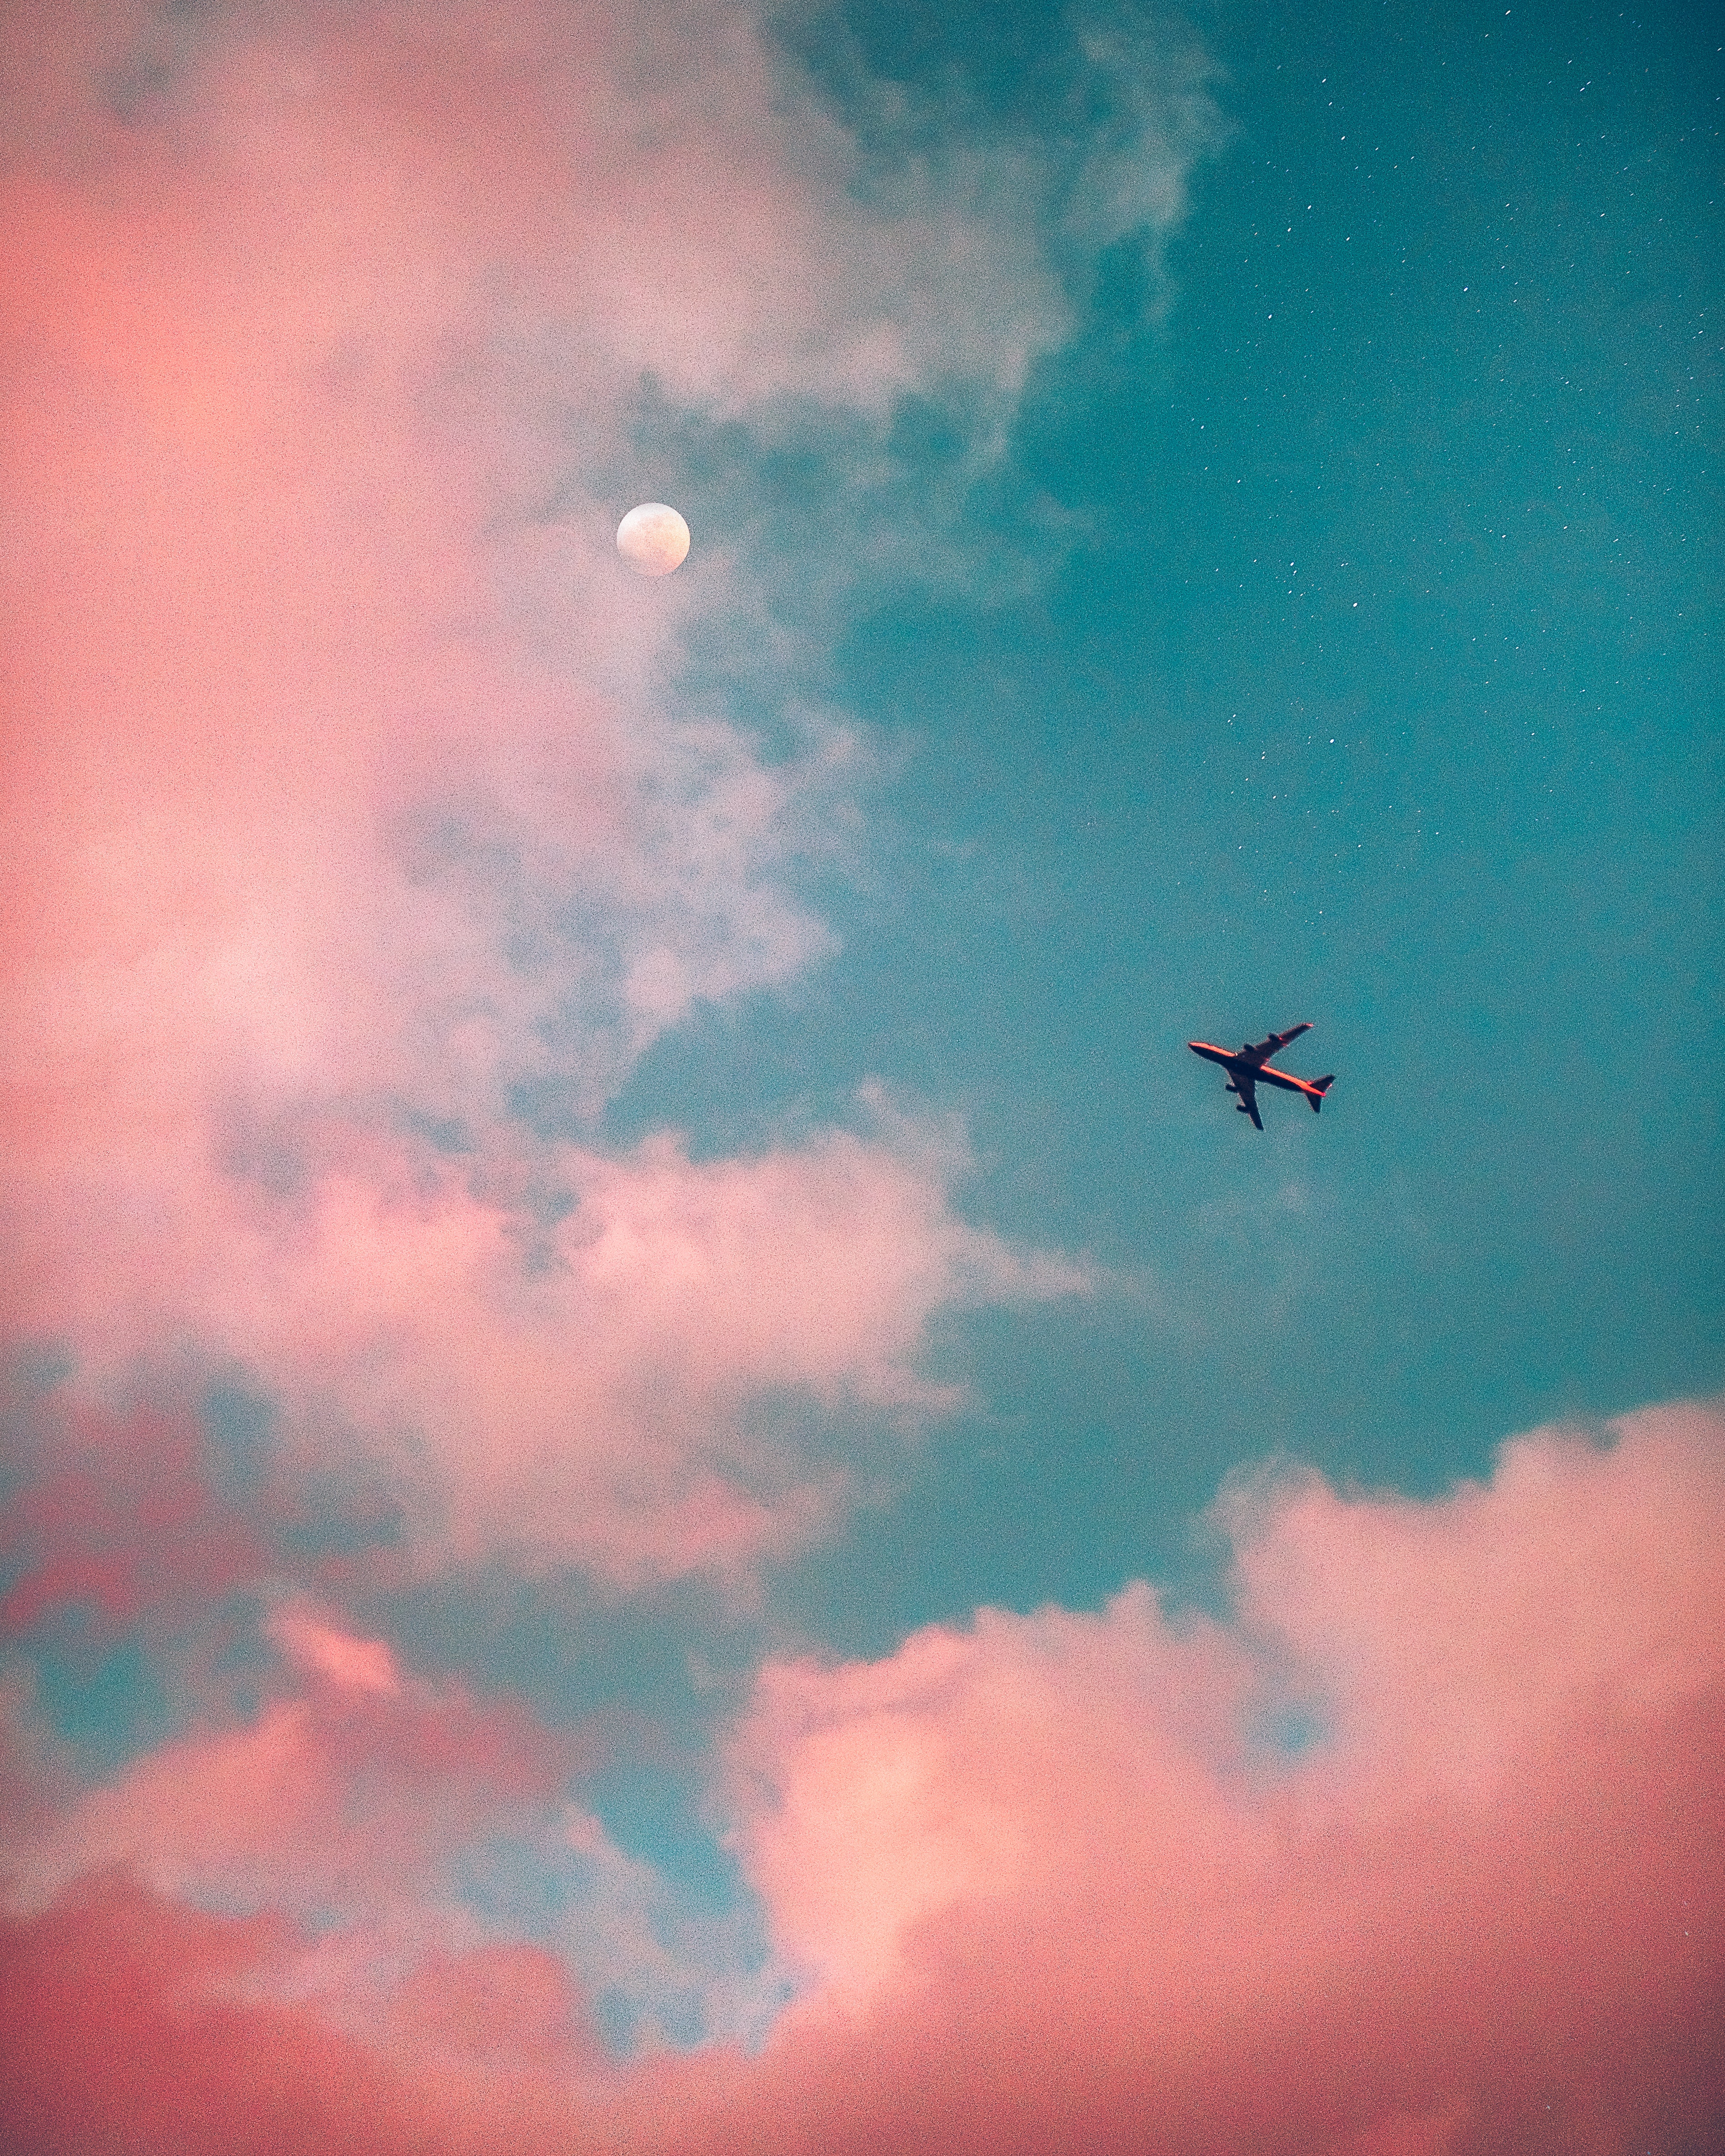 Pink Clouds Sky Wallpapers